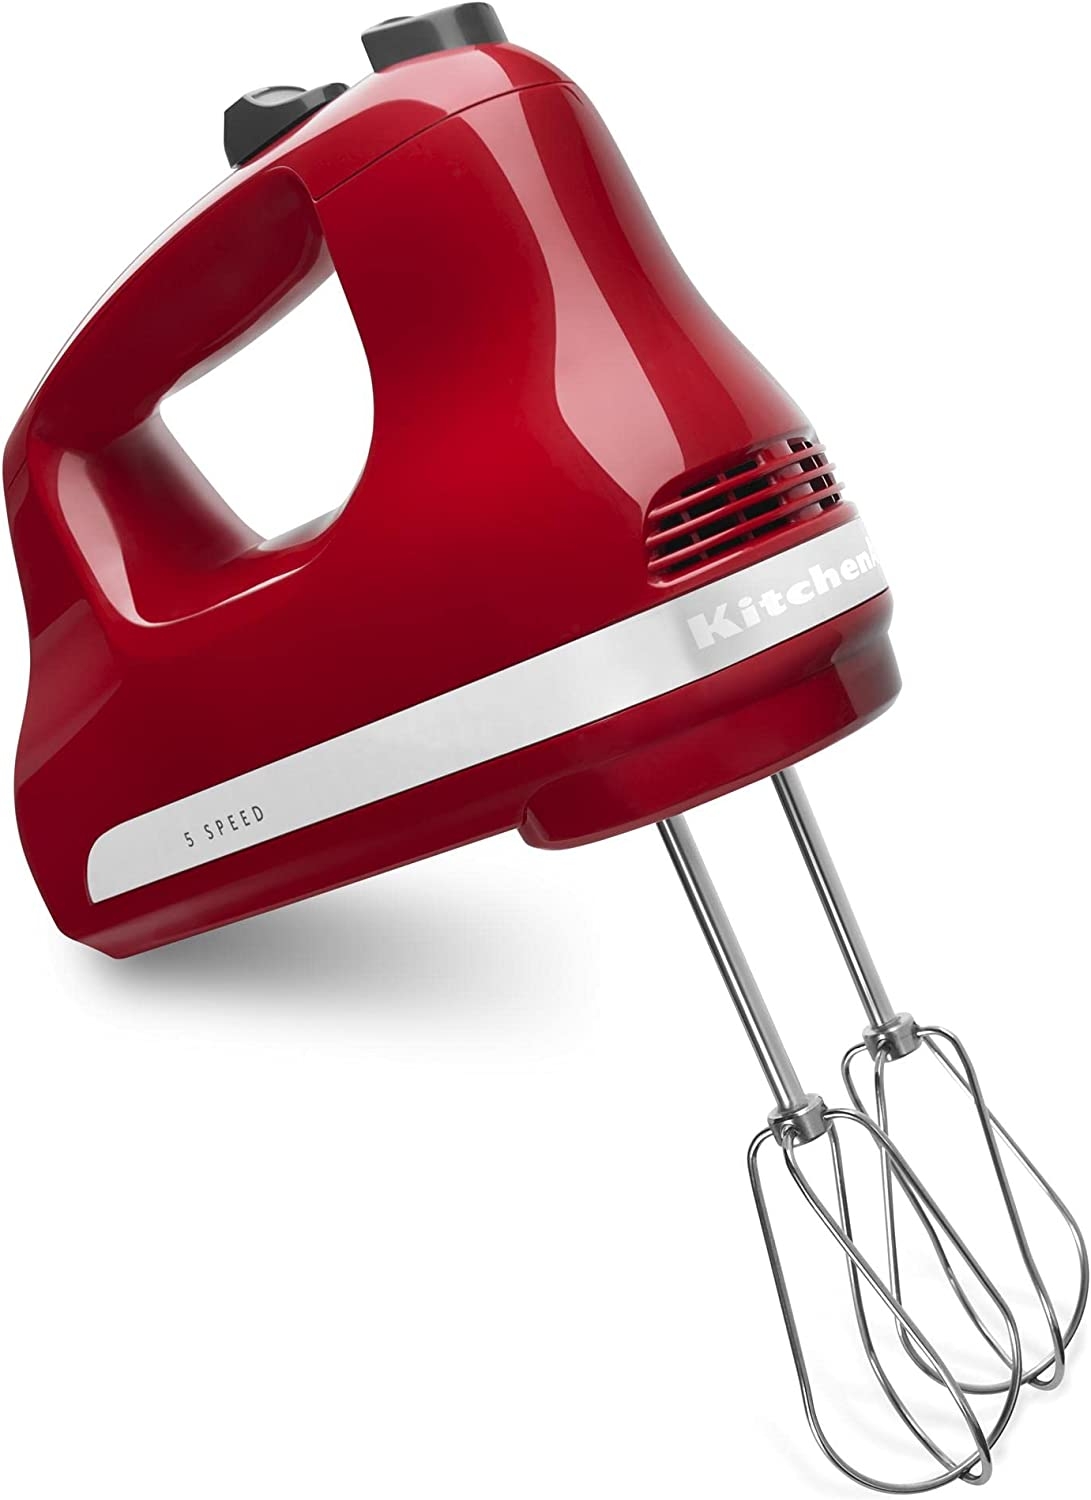 KitchenAid 5-Speed Ultra Power Hand Mixer, Empire Red Import To Shop ×Product customization General Description Gallery Reviews